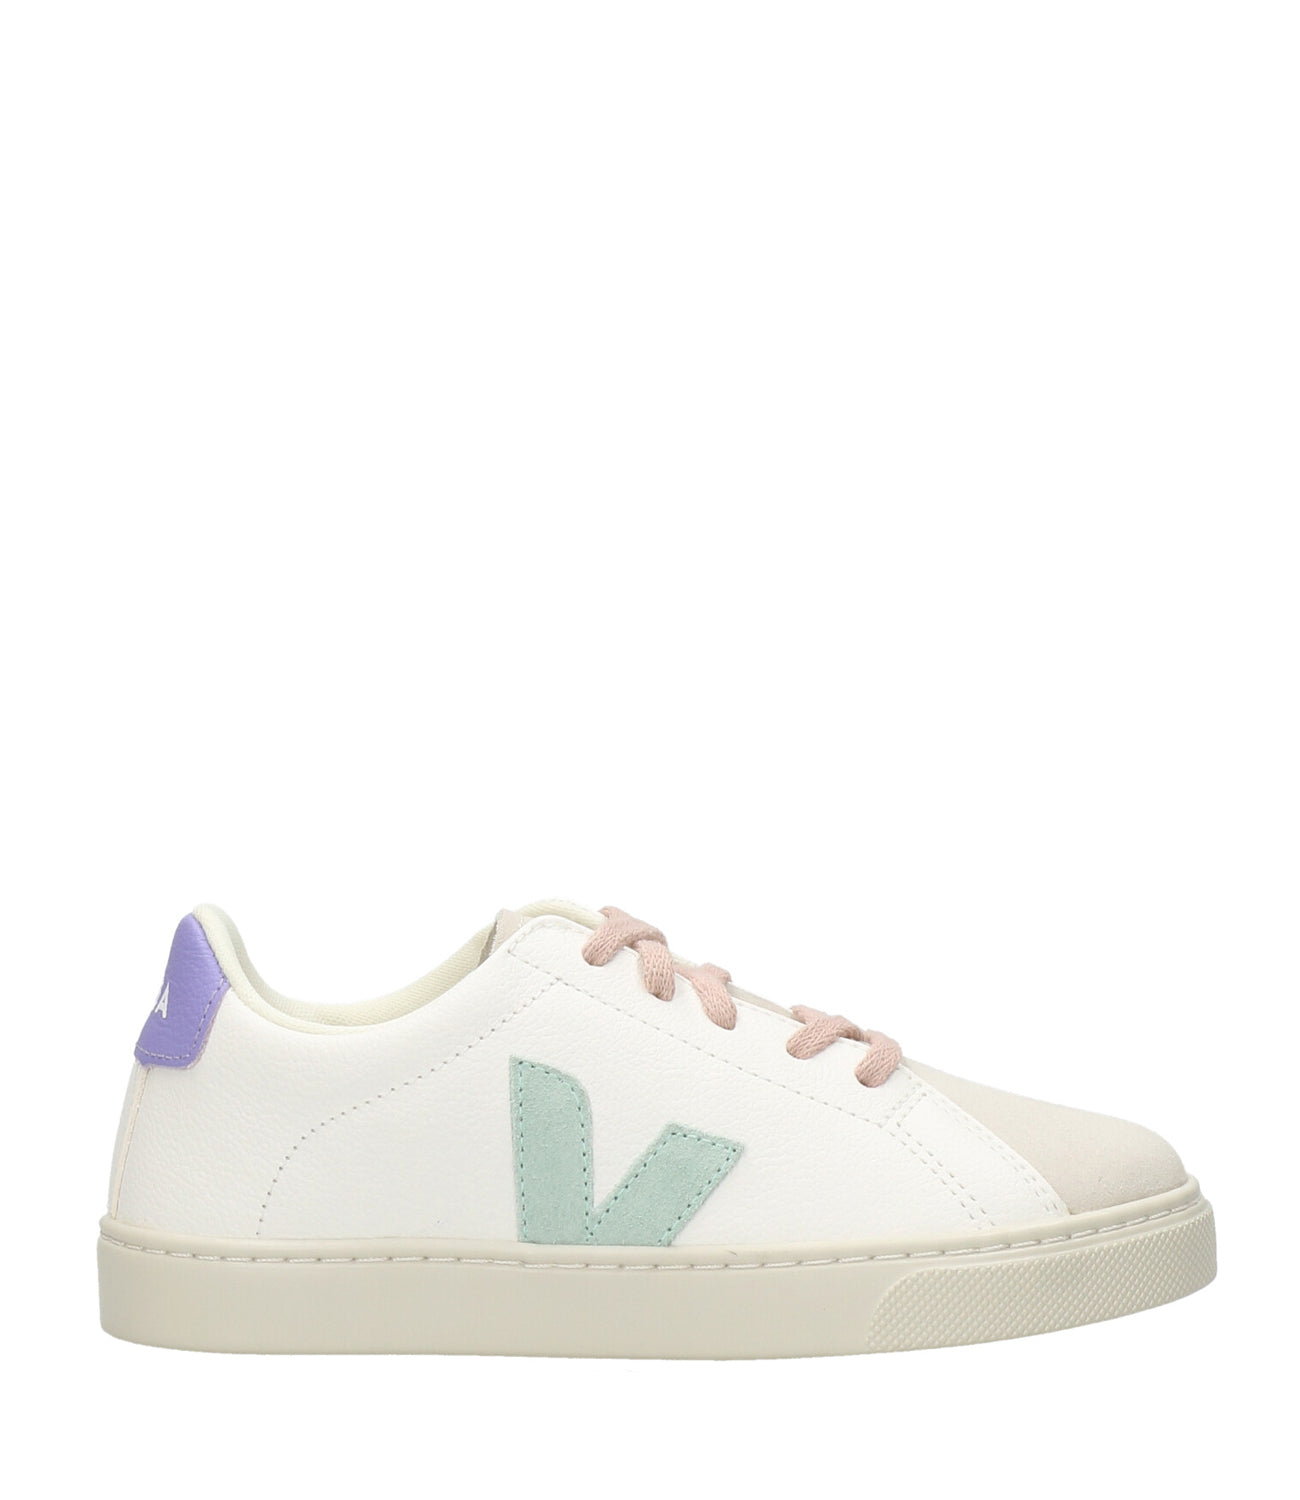 Veja Kids | Esplar Laces Sneakers White, Green and Lavender